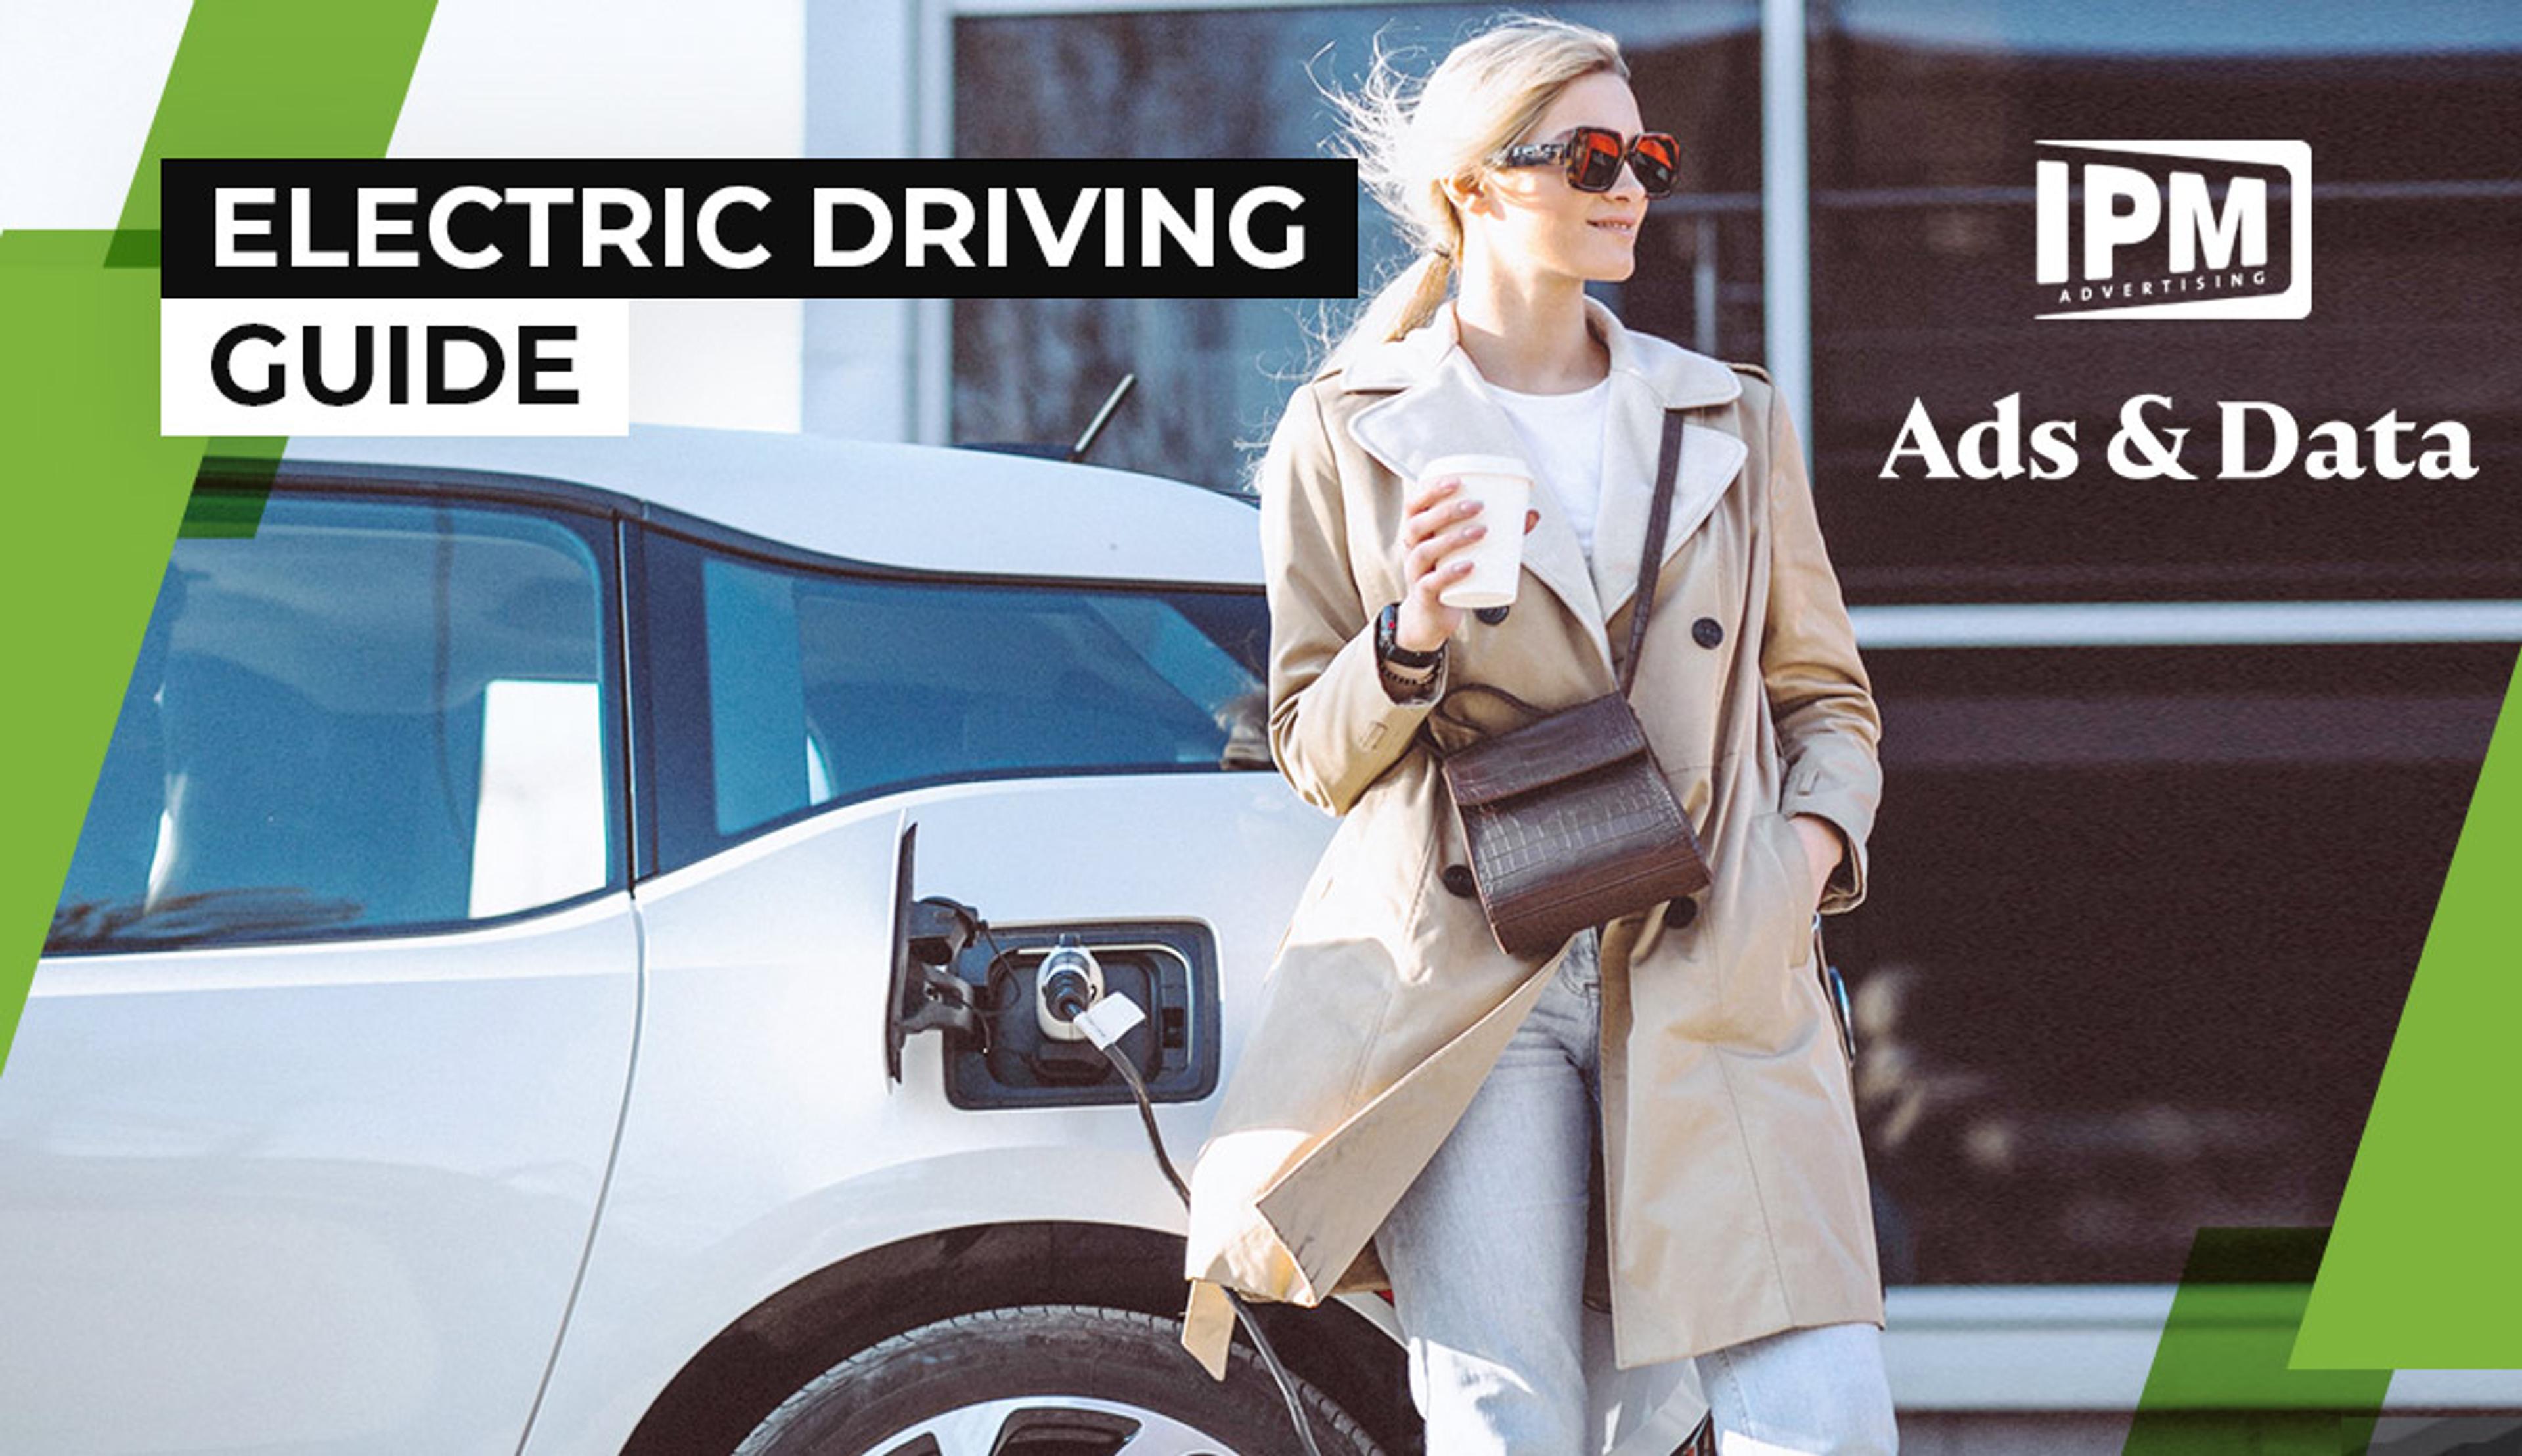 Electric Driving Guide